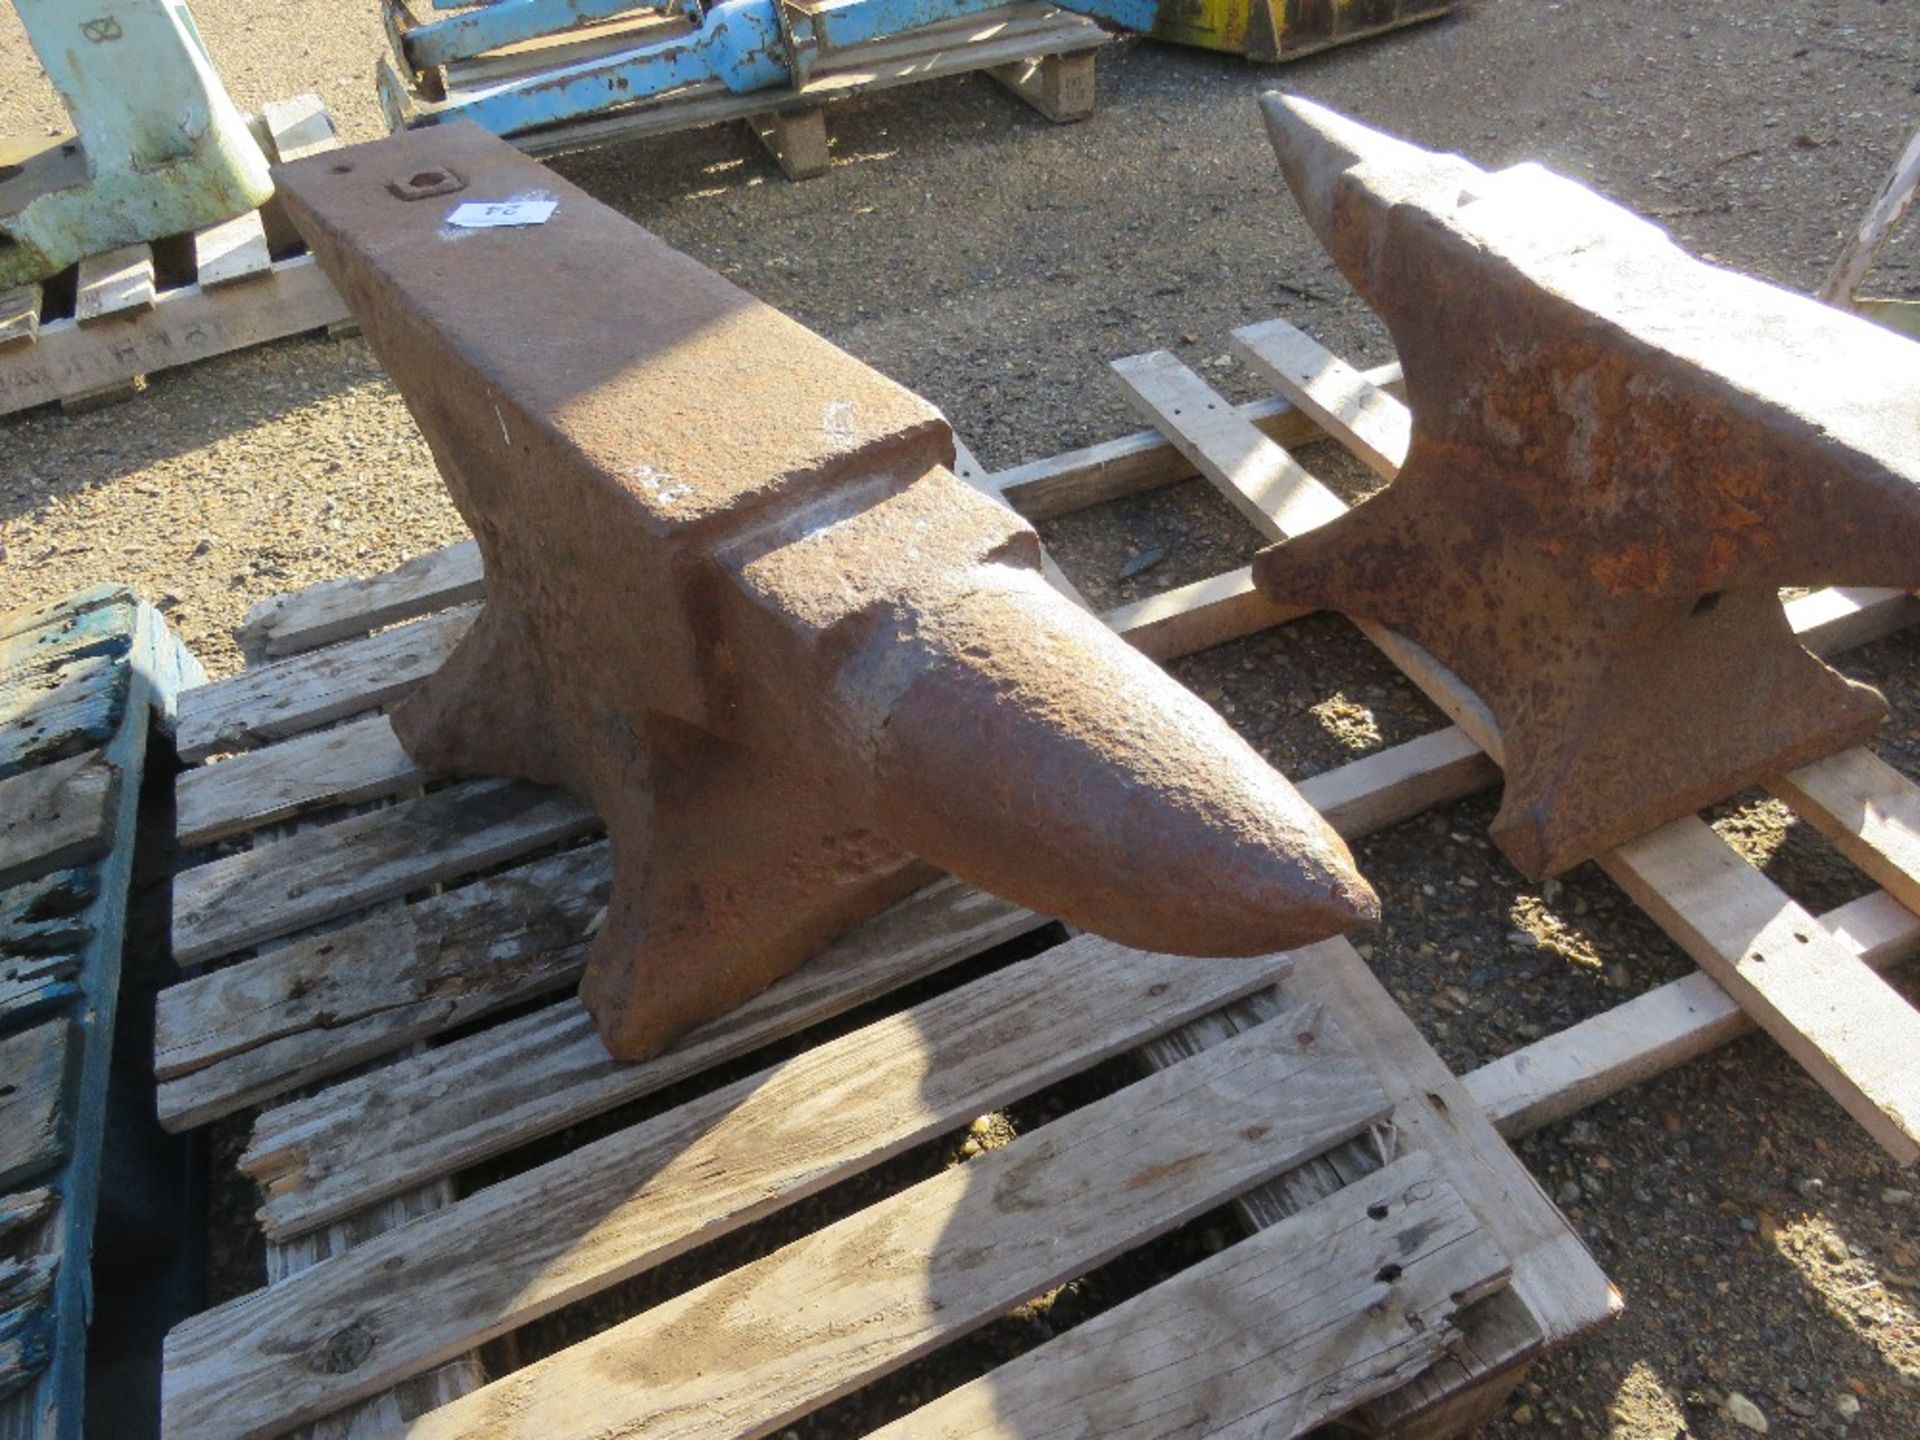 BLACKSMITH'S ANVIL, 90CM OVERALL LENGTH APPROX. - Image 3 of 3